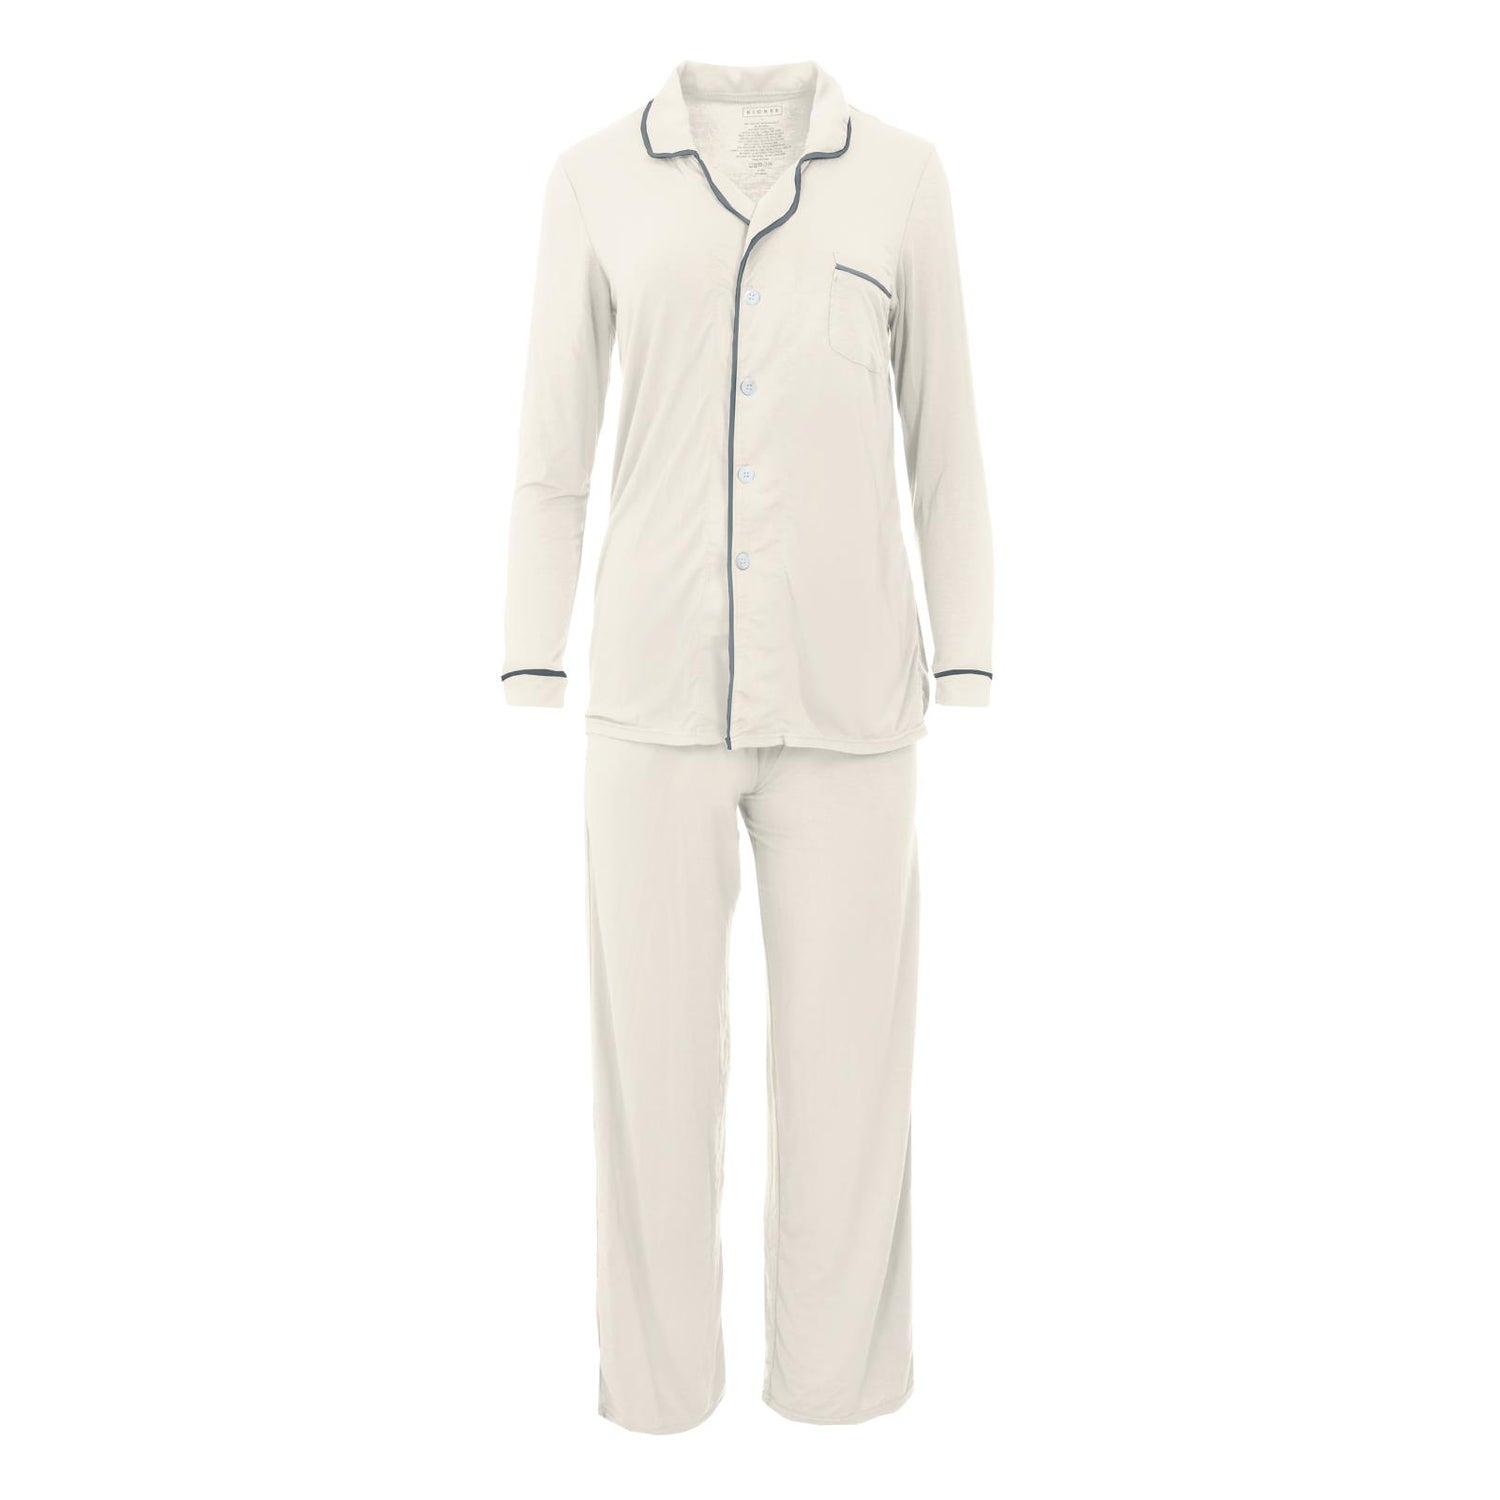 Women's Solid Woven Long Sleeve Collared Pajama Set in Natural with Slate